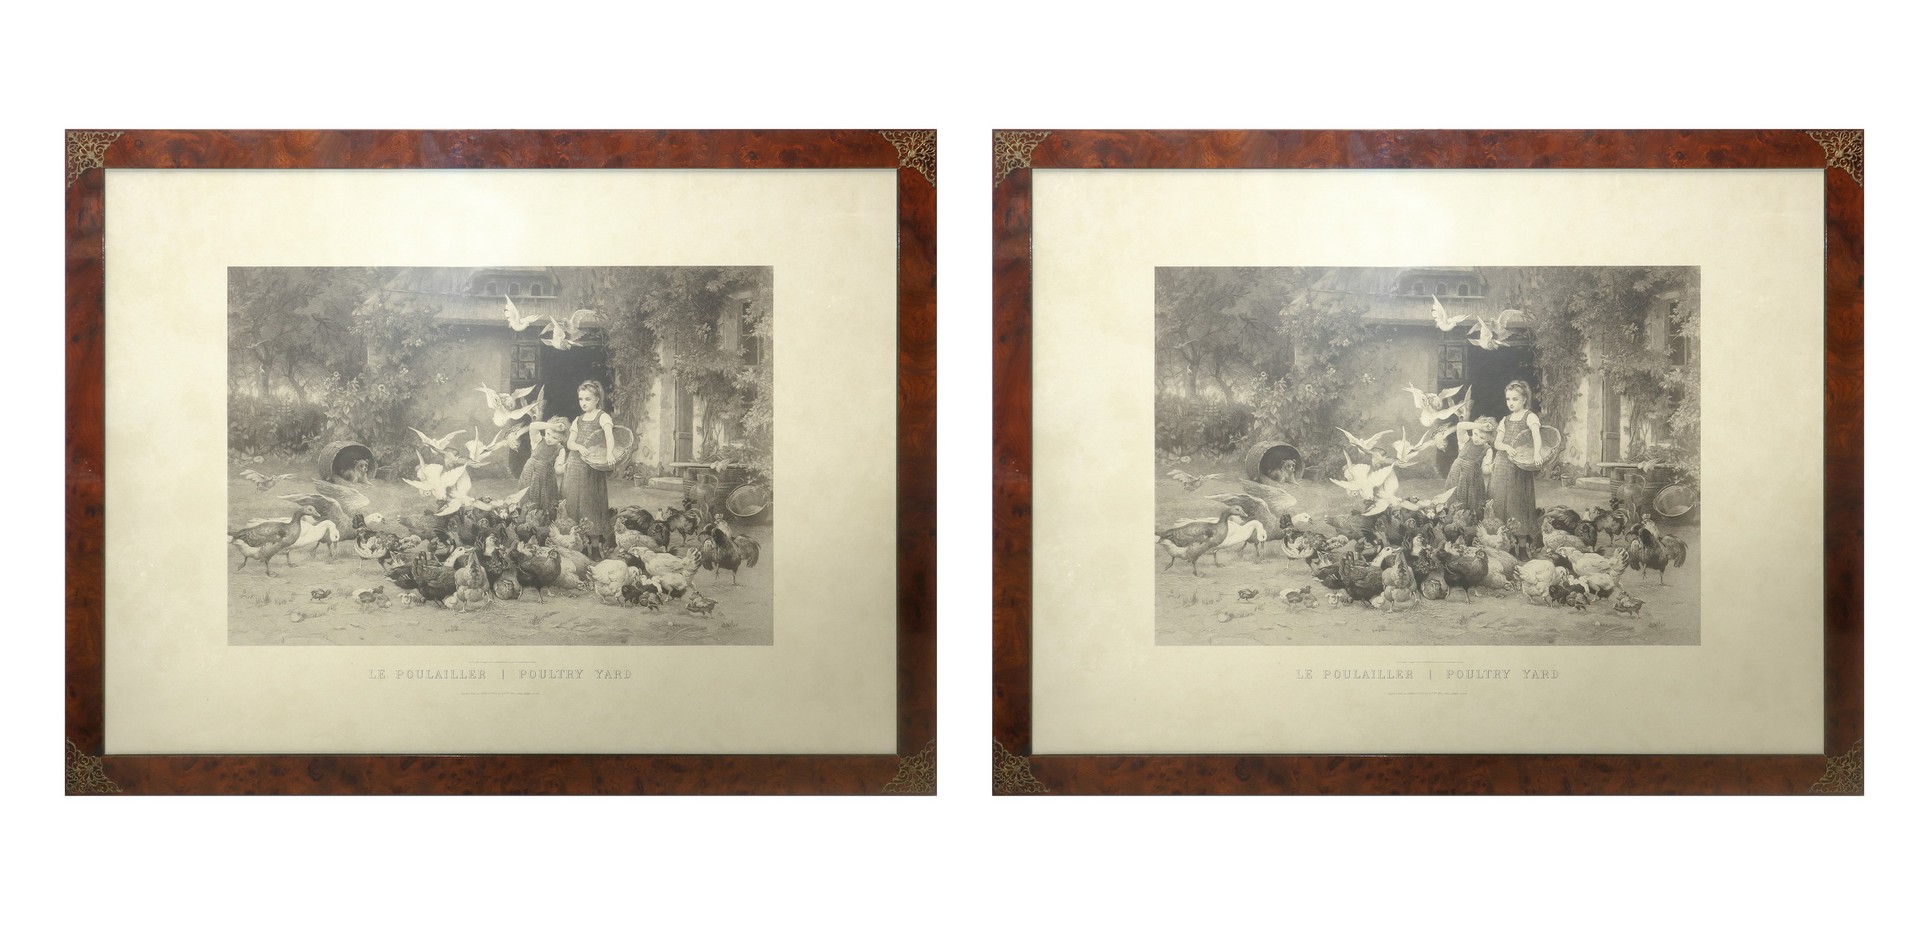 Pair of lithographs, Le Poulailler and Grande Representation